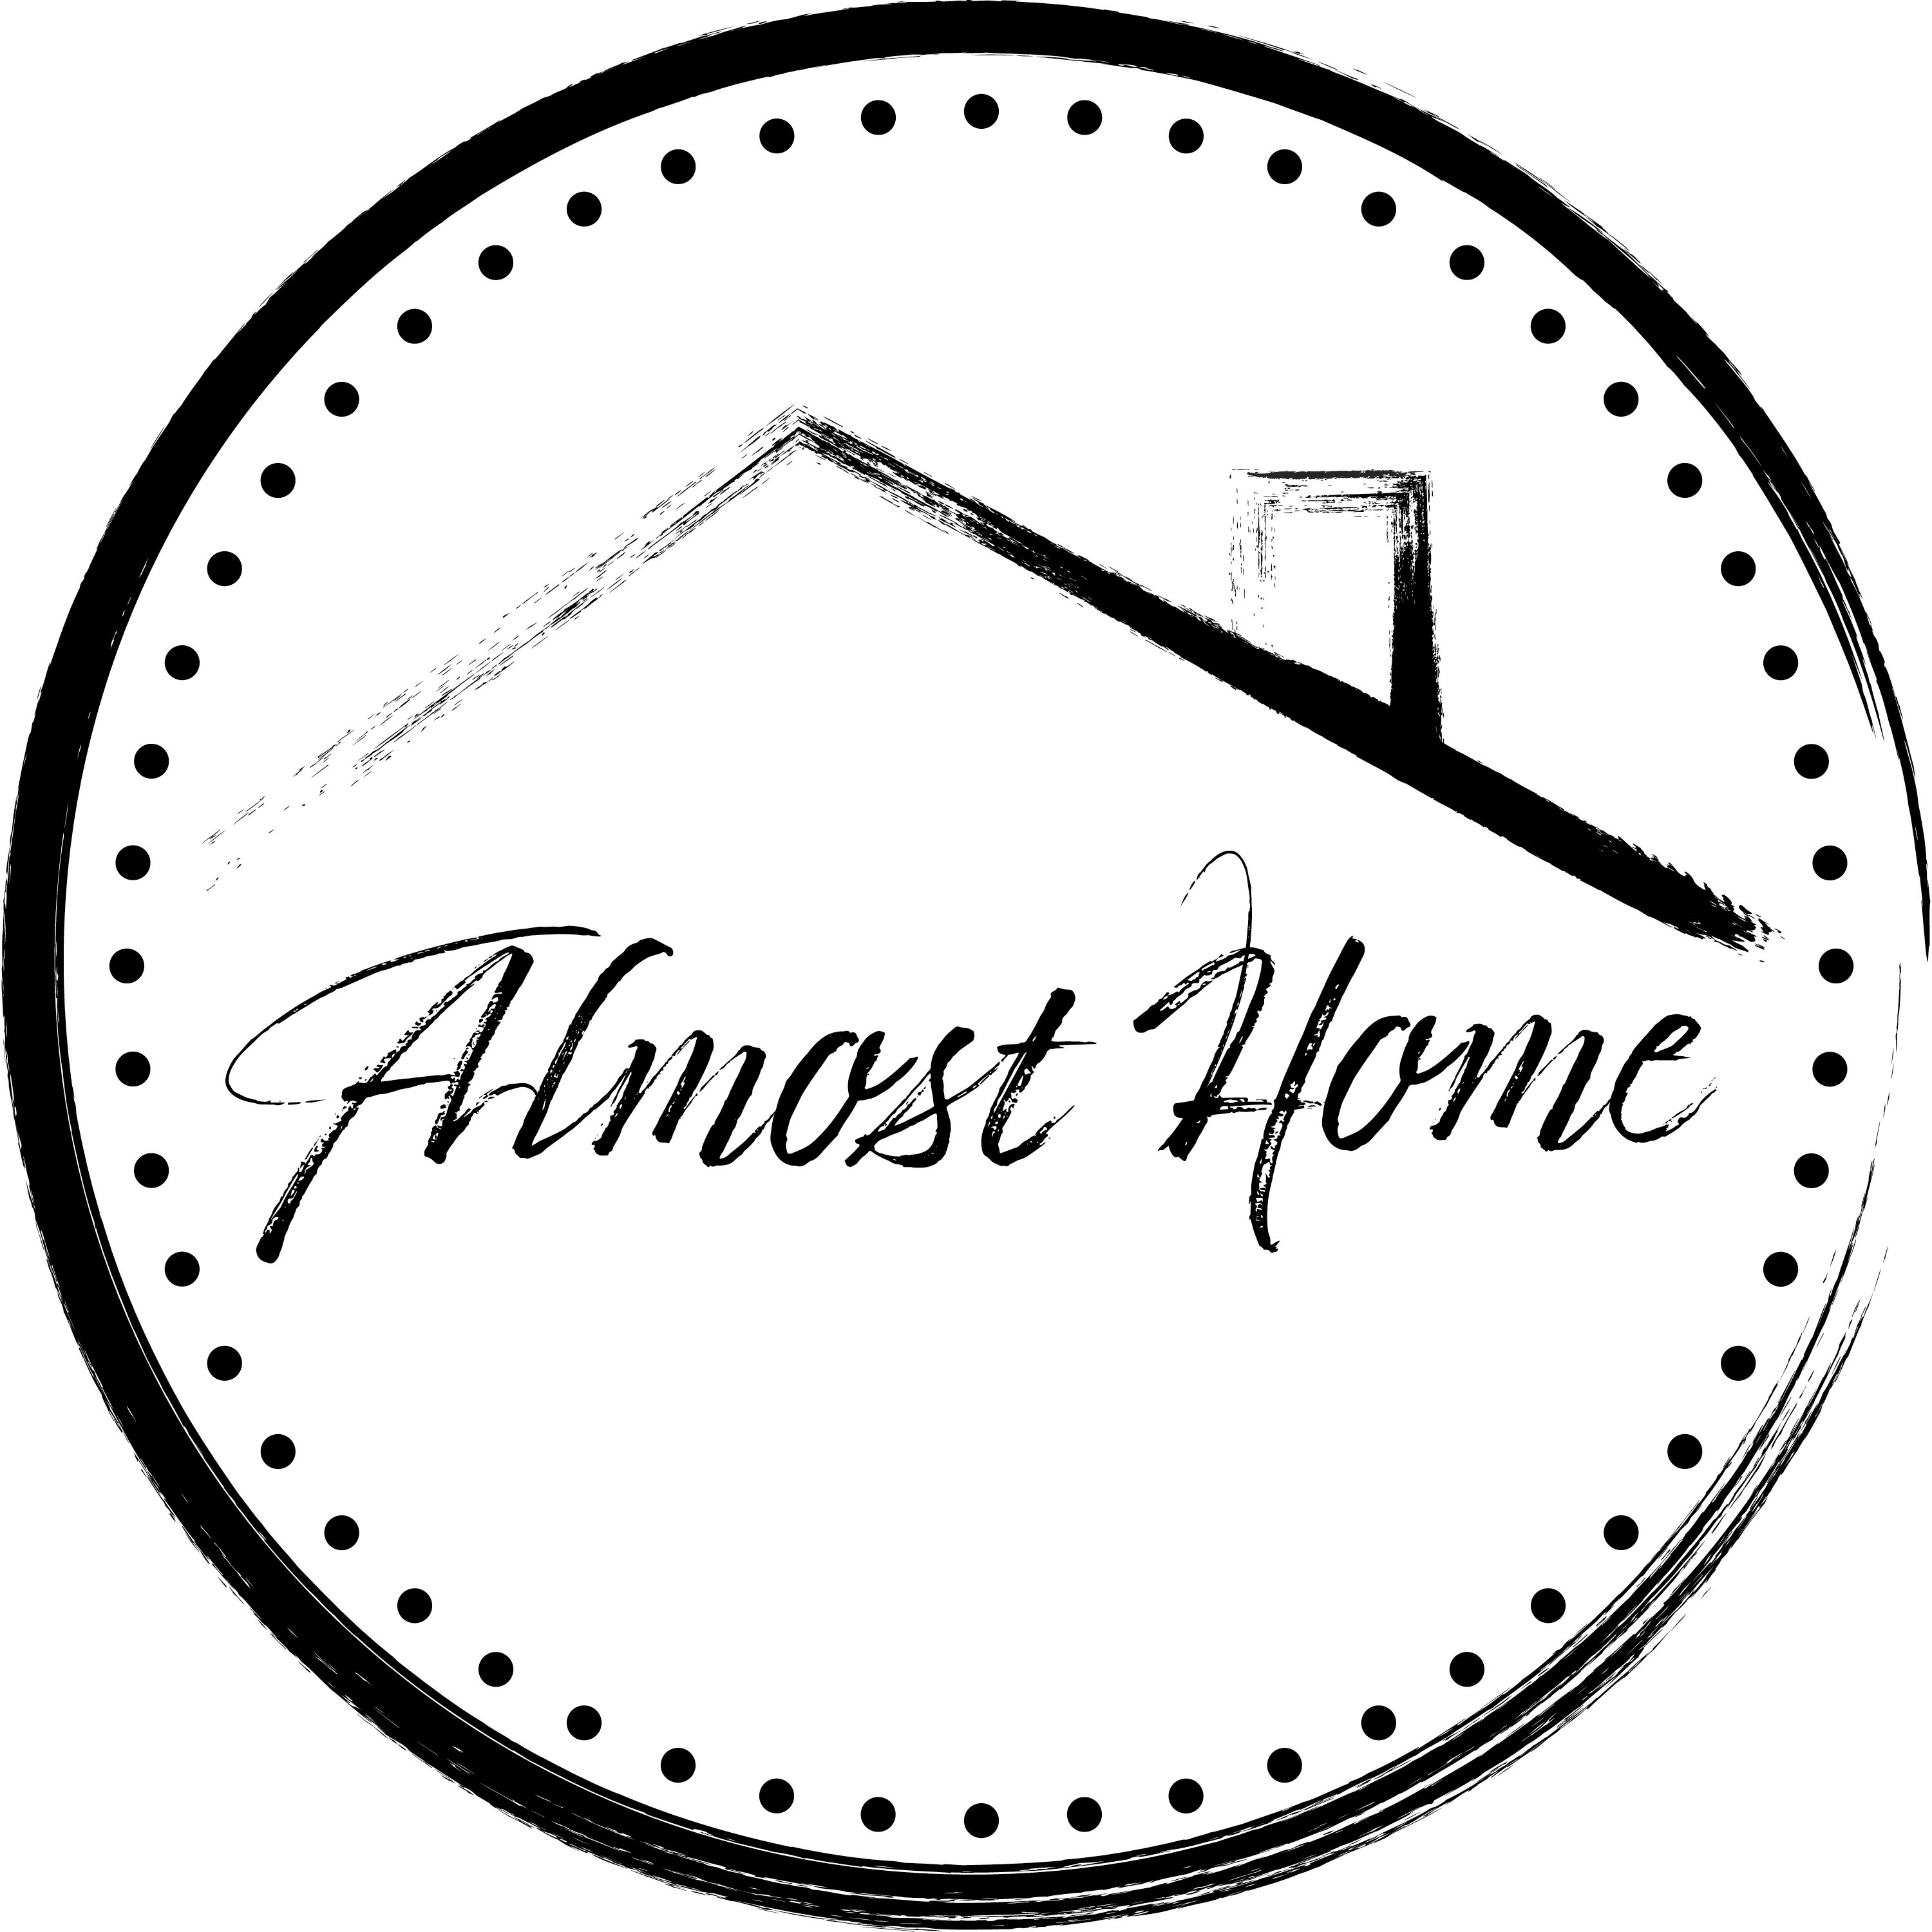 Almost Home - Sea Bright 1136 N Ocean Ave